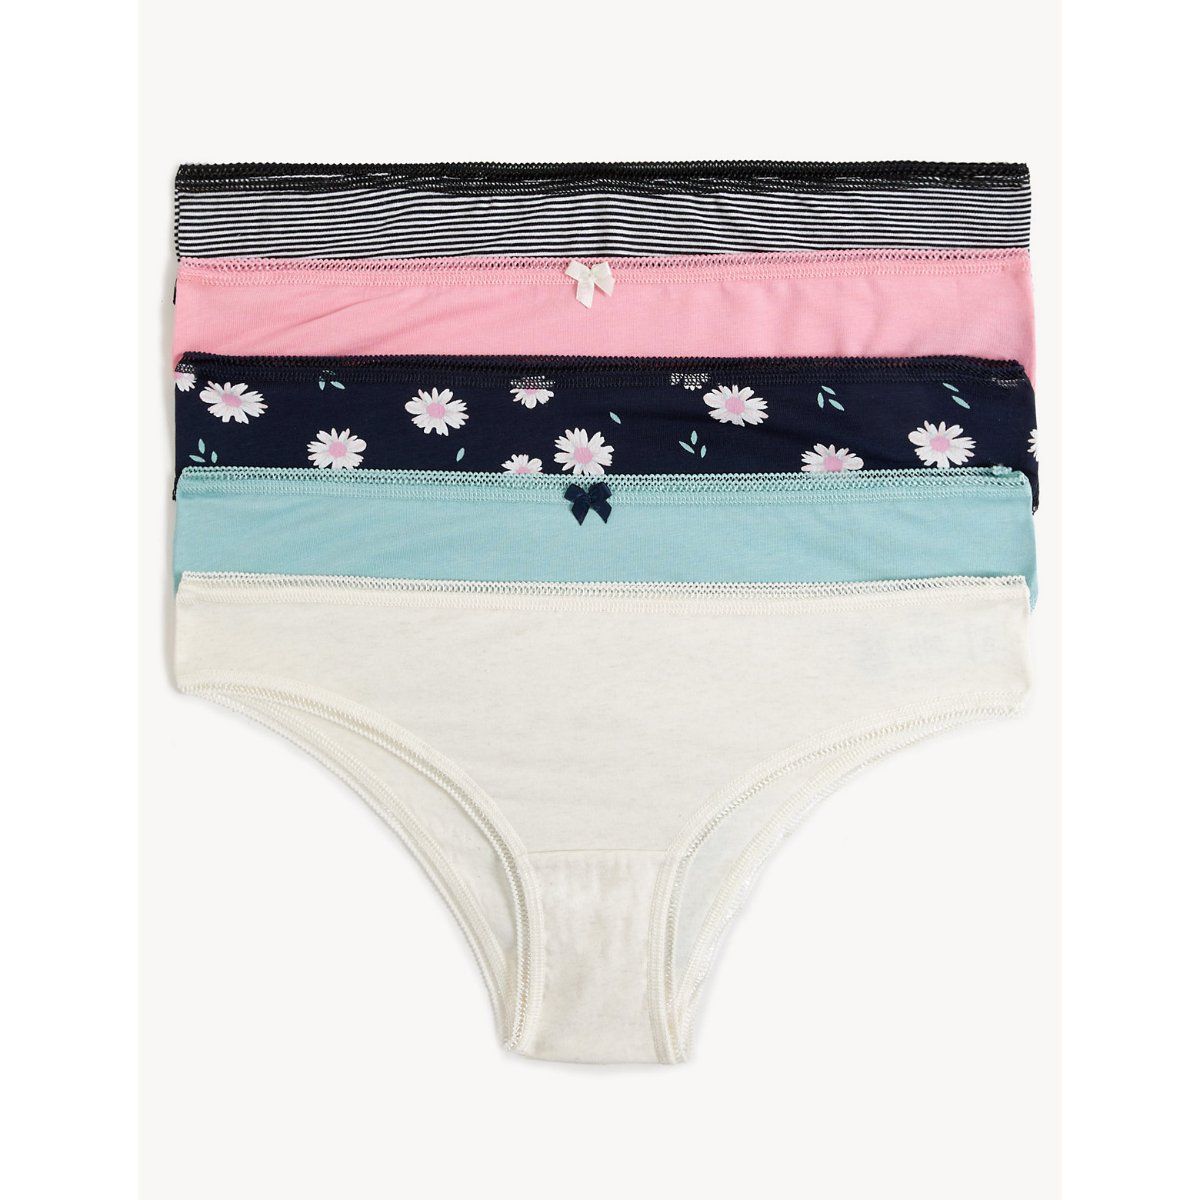 Buy Marks & Spencer Cotton Mix Knickers - Multi-color (Pack of 5